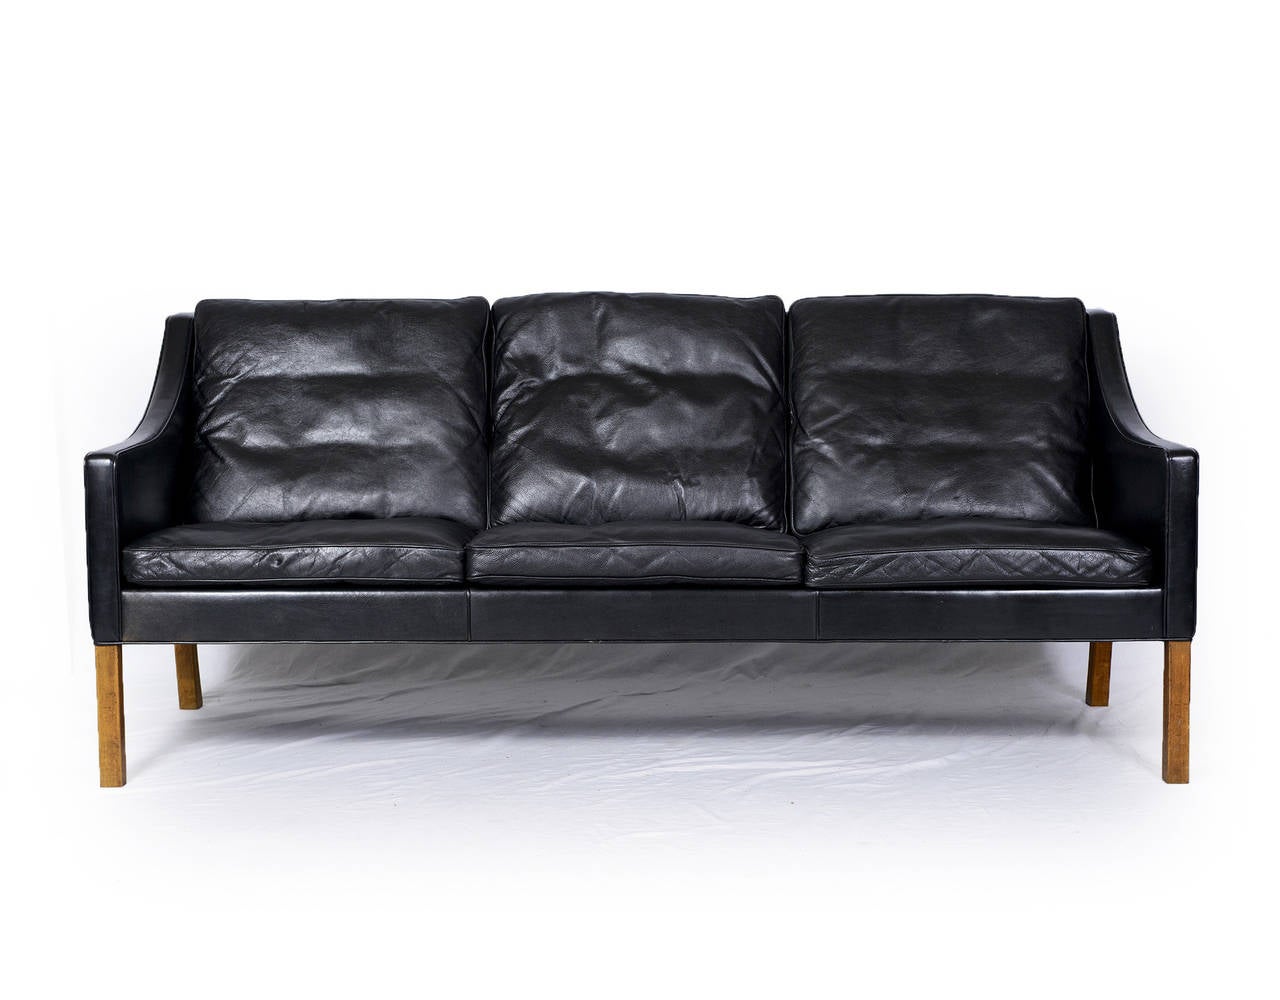 Børge Mogensen model #2209 three-seat leather sofa designed in 1963 and produced by Fredericia.